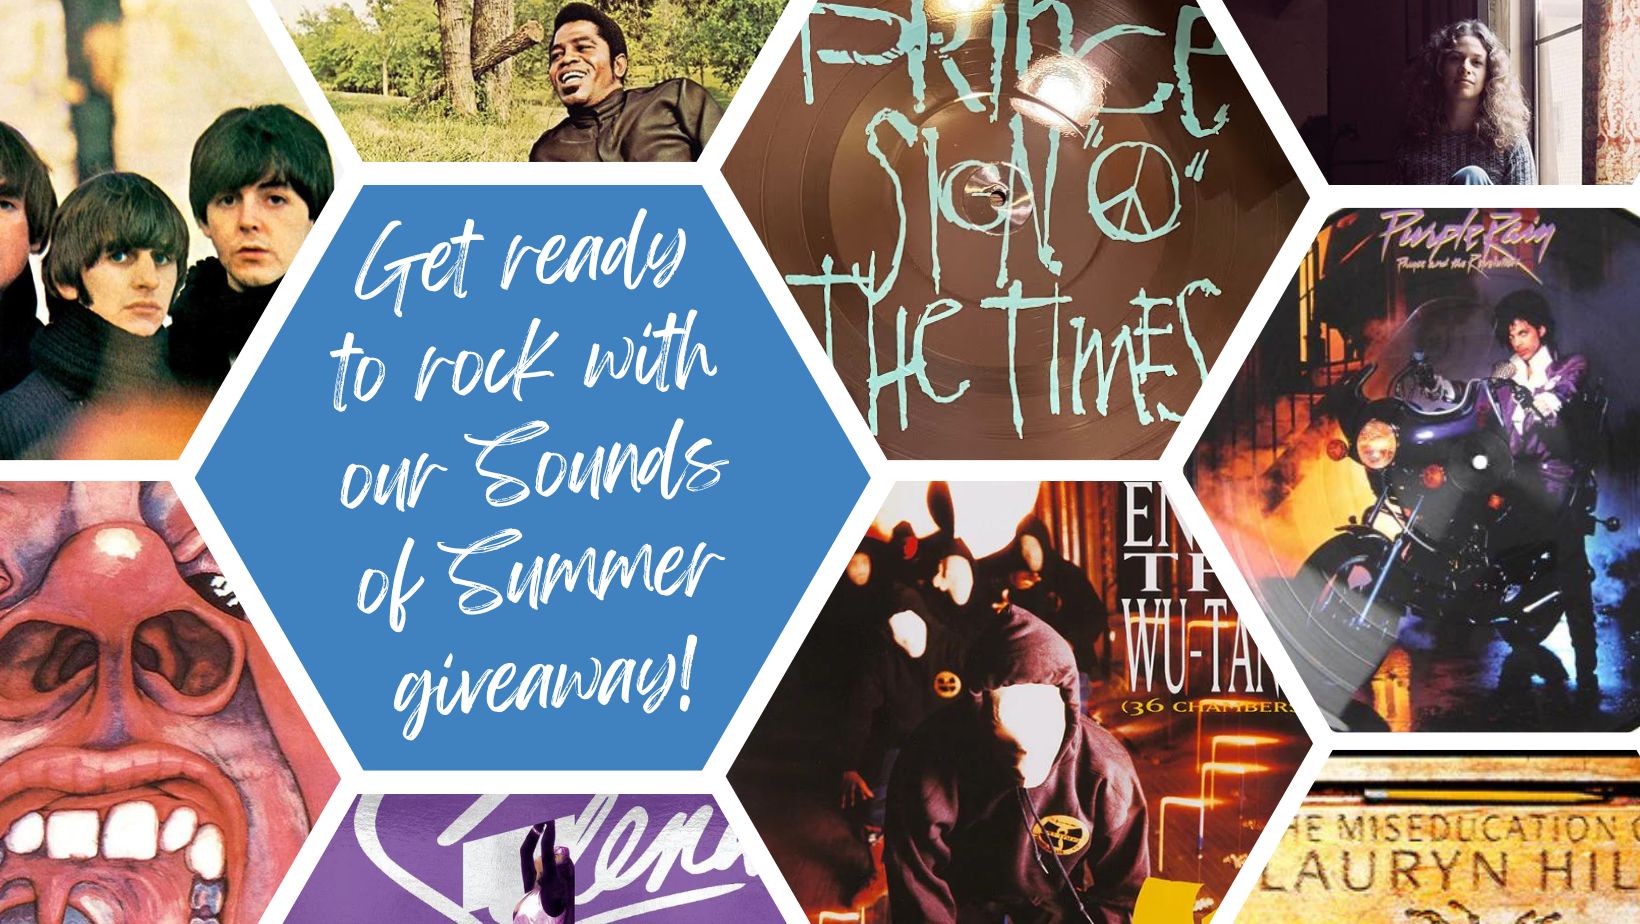 Keep the Beat All Summer Long with our Sounds of Summer Giveaway!